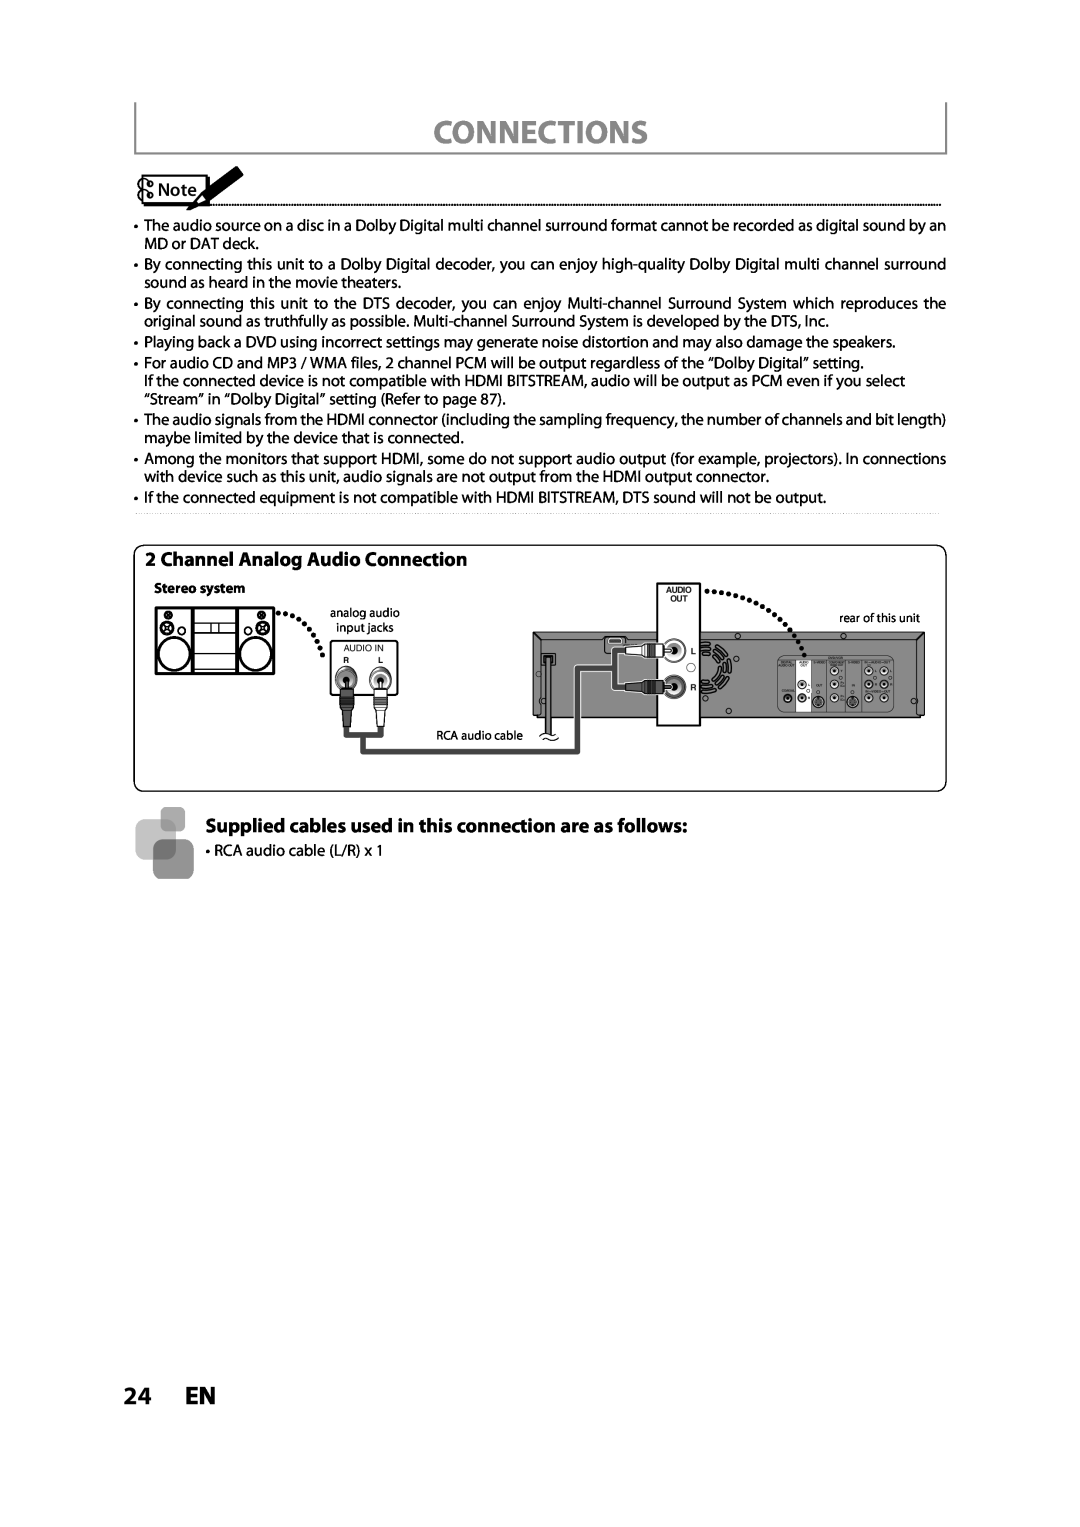 Toshiba DVR620KC owner manual 24 EN, Channel Analog Audio Connection, Connections, Stereo system 